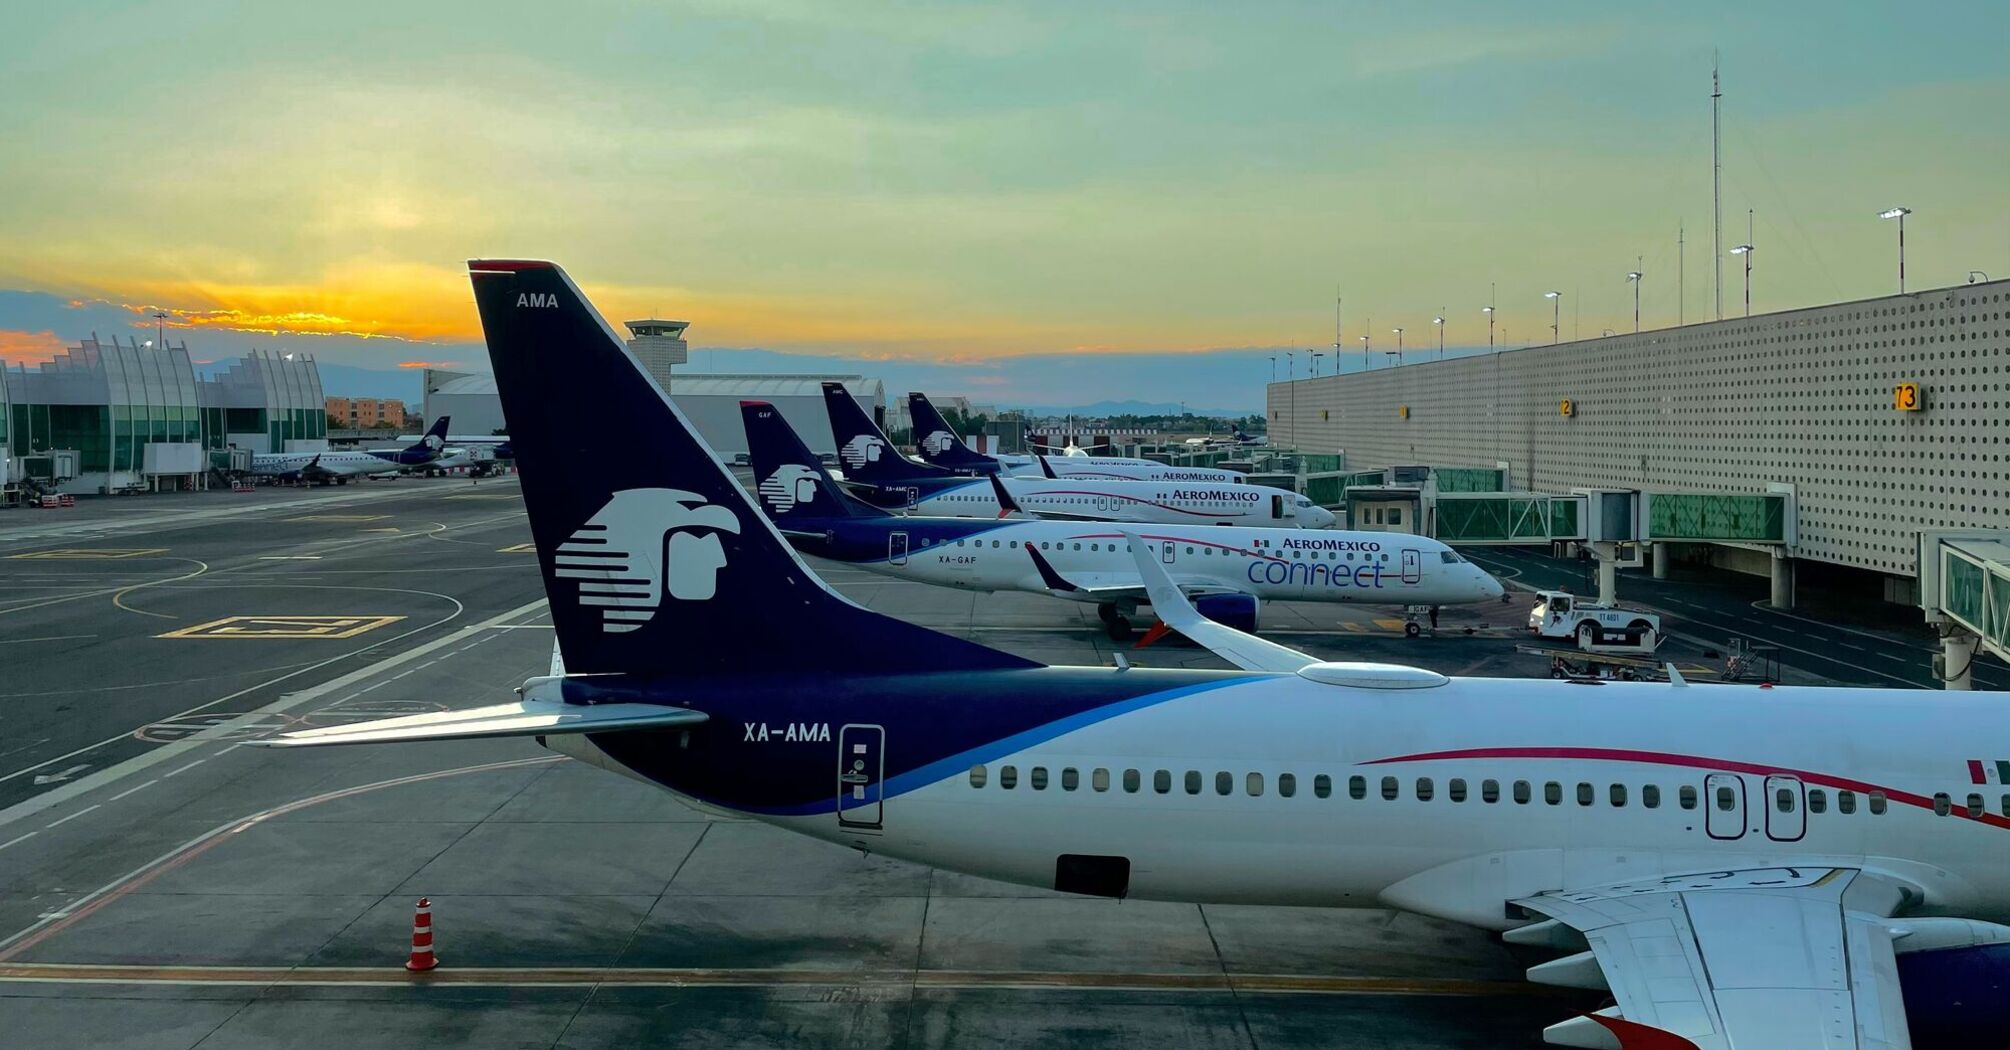 Sunset in Mexico City Airport Aeromexico airplane 